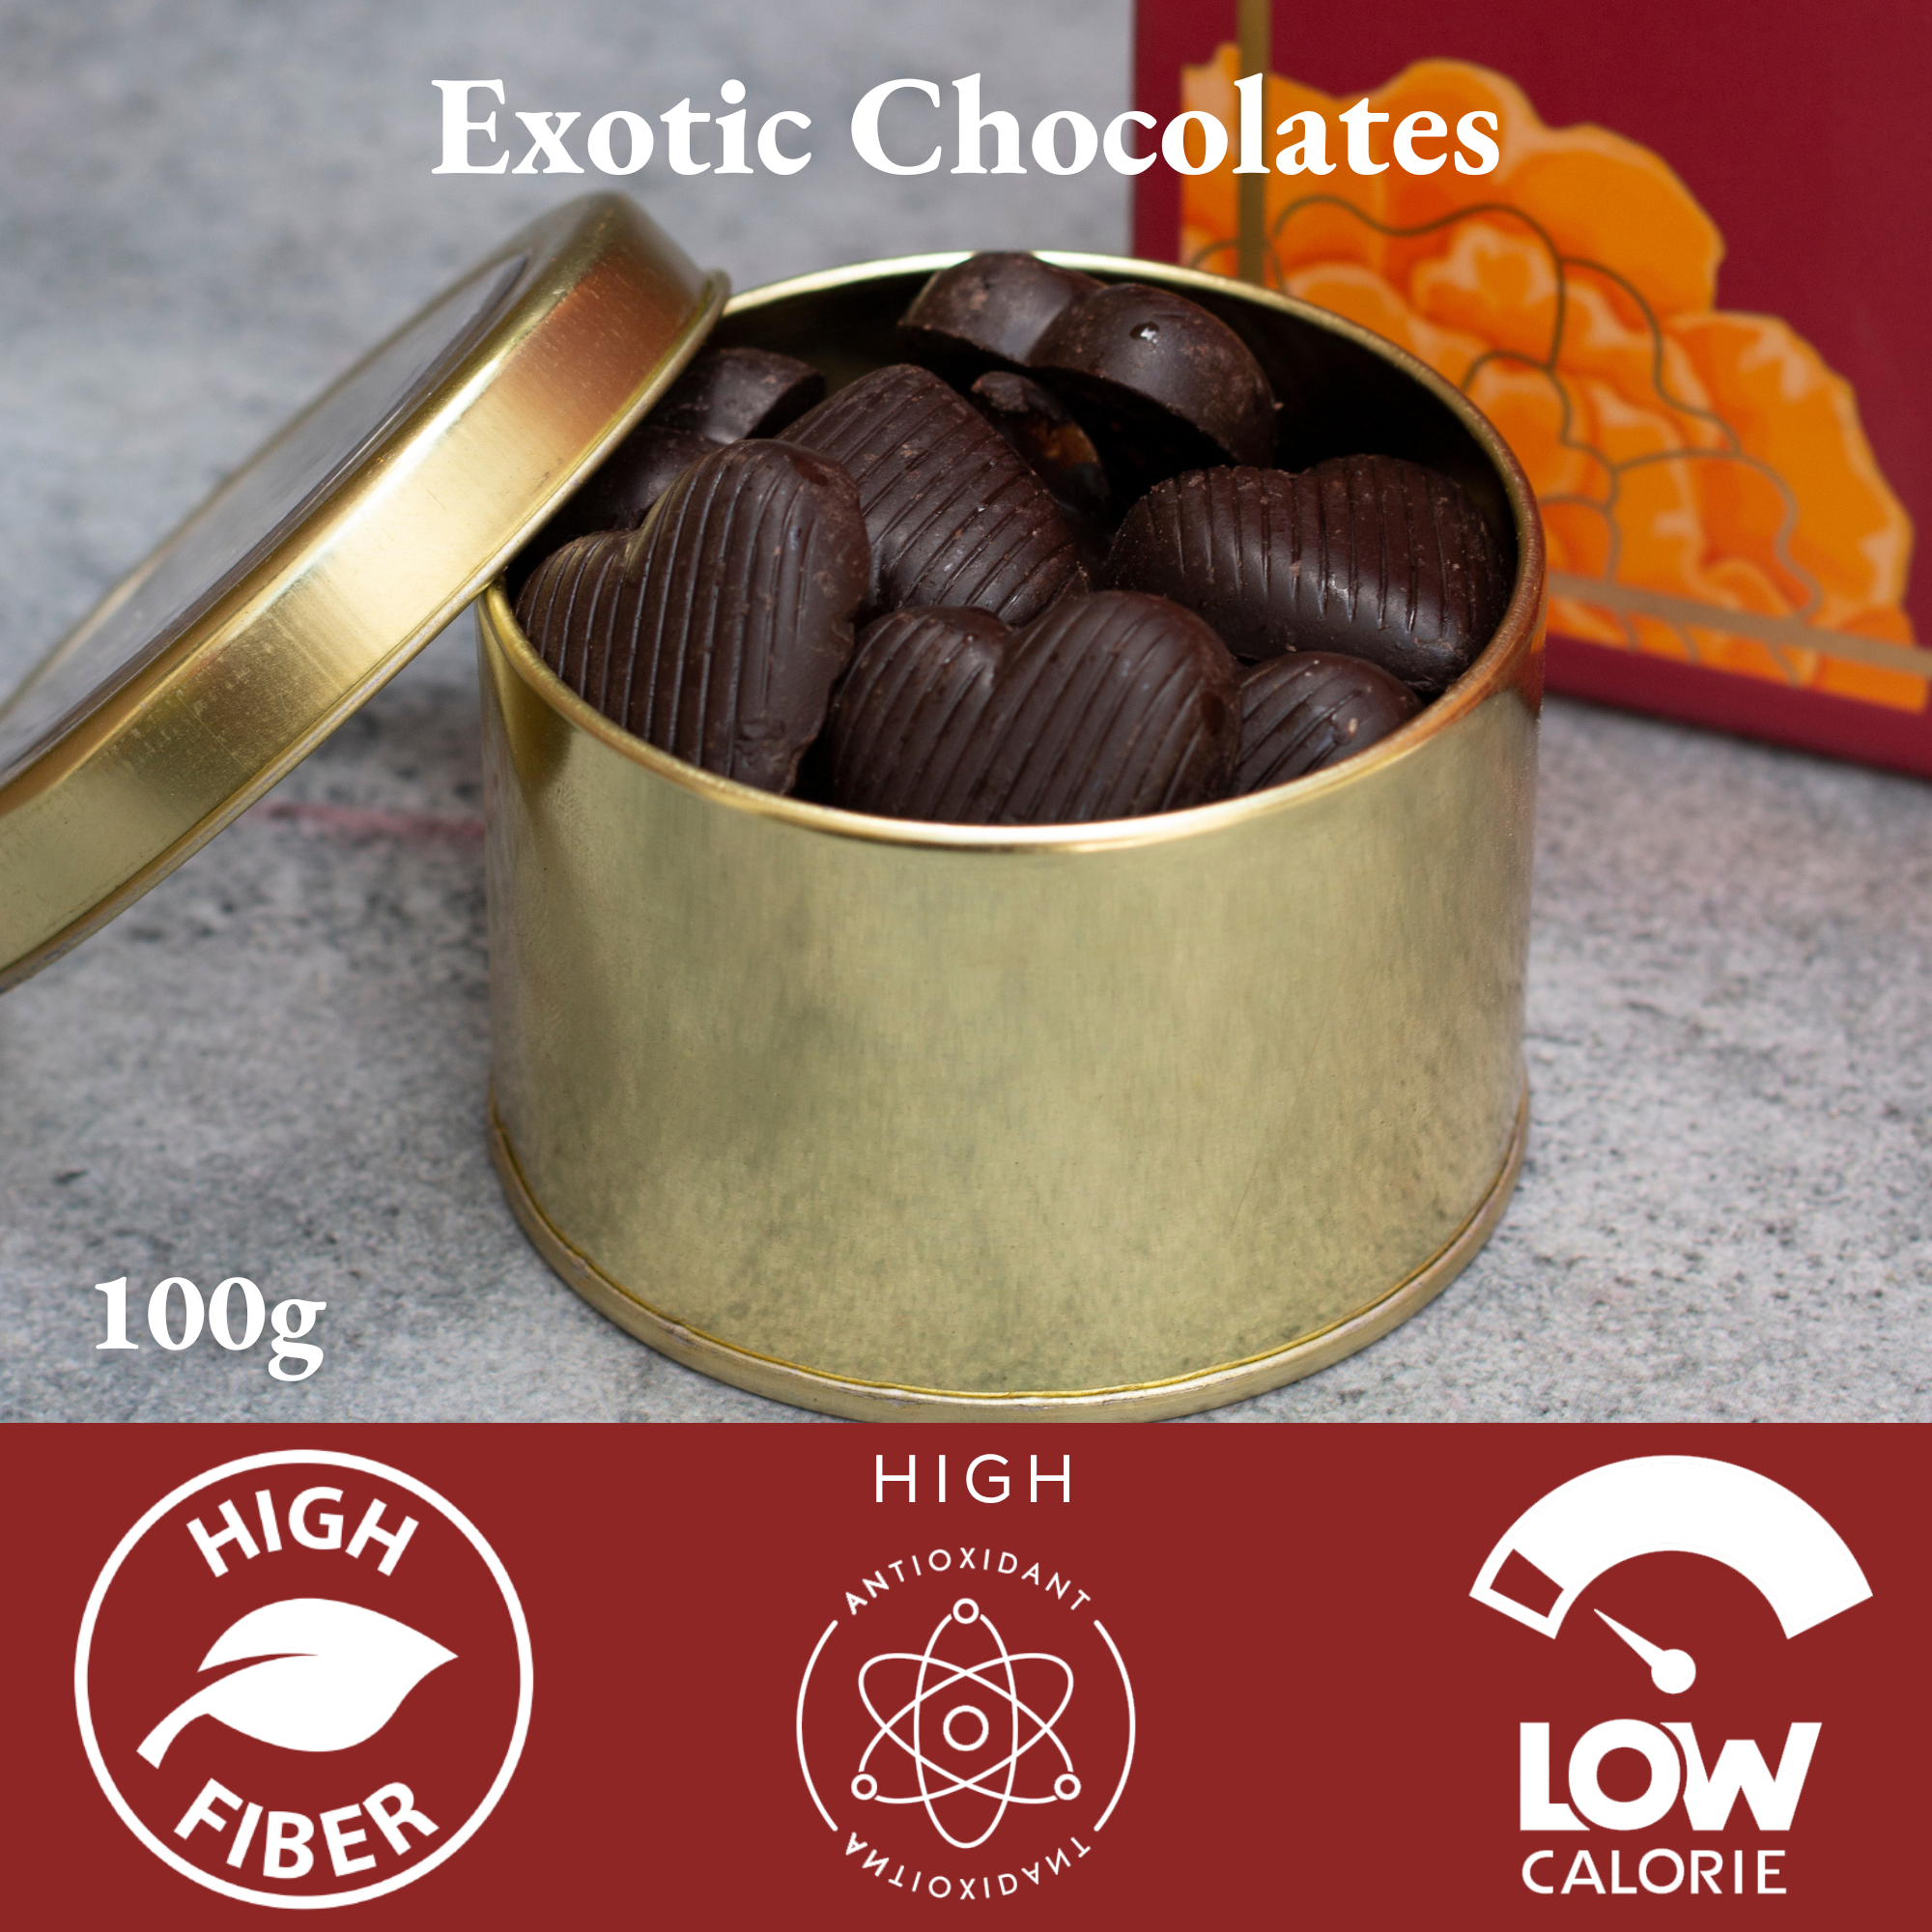 Out of Stock-Send Chocolate Hampers to India on Diwali-#1